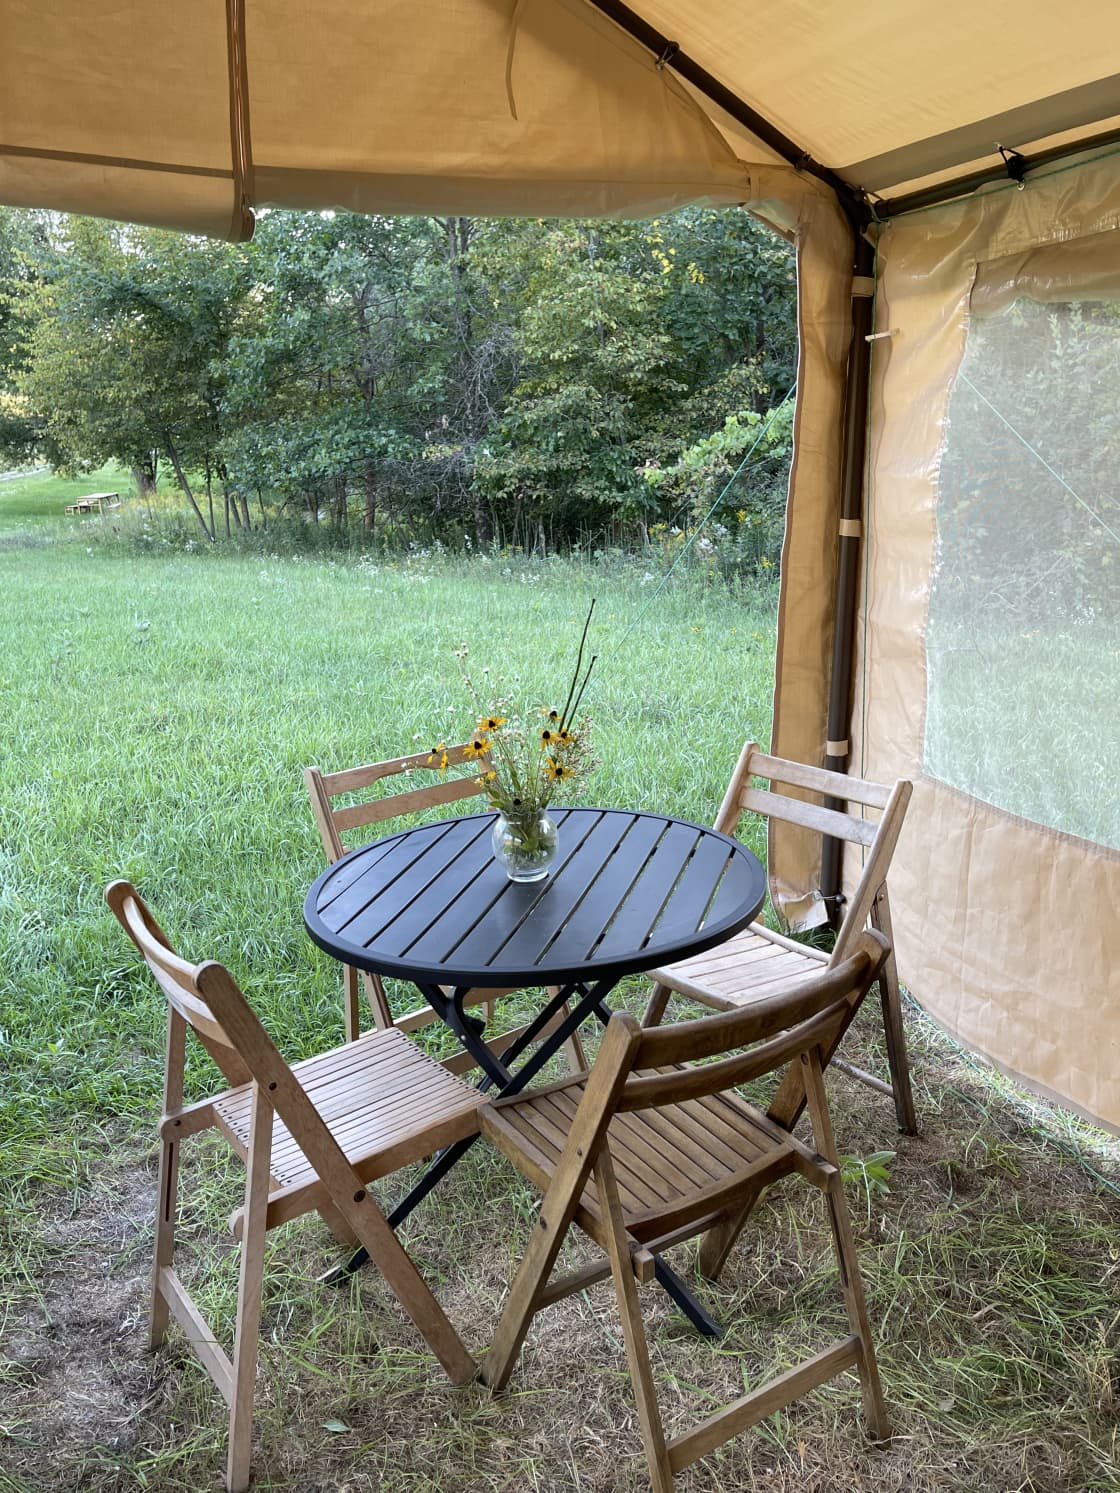 For sheltered dining, we have this in the outdoor kitchen.